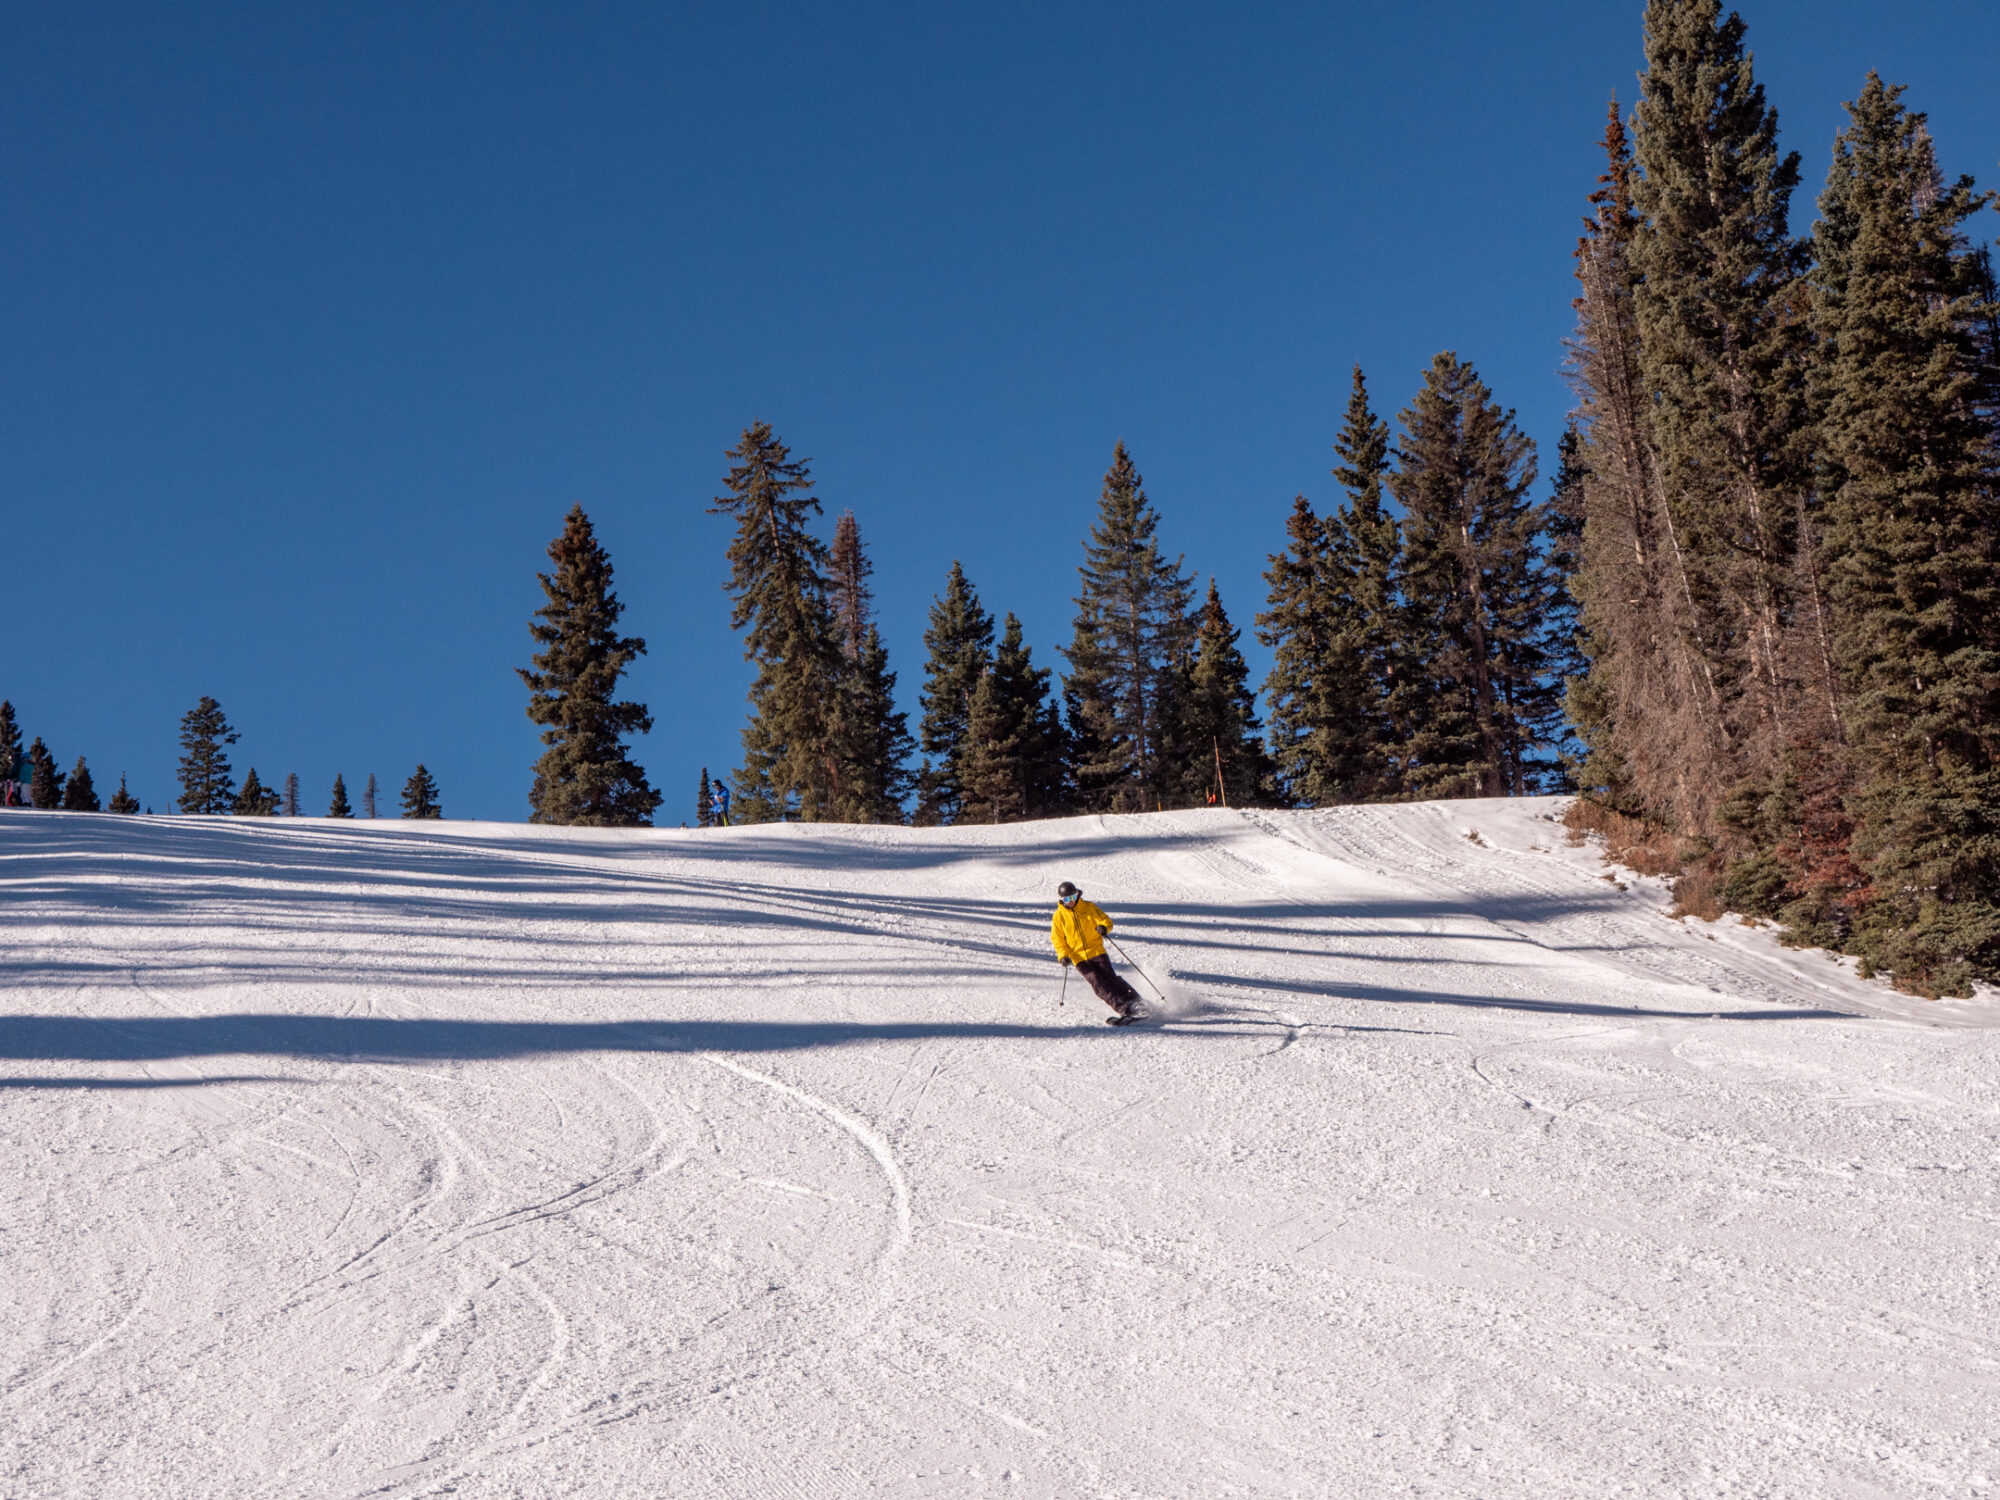 Skier skiing down slopes with blue sky